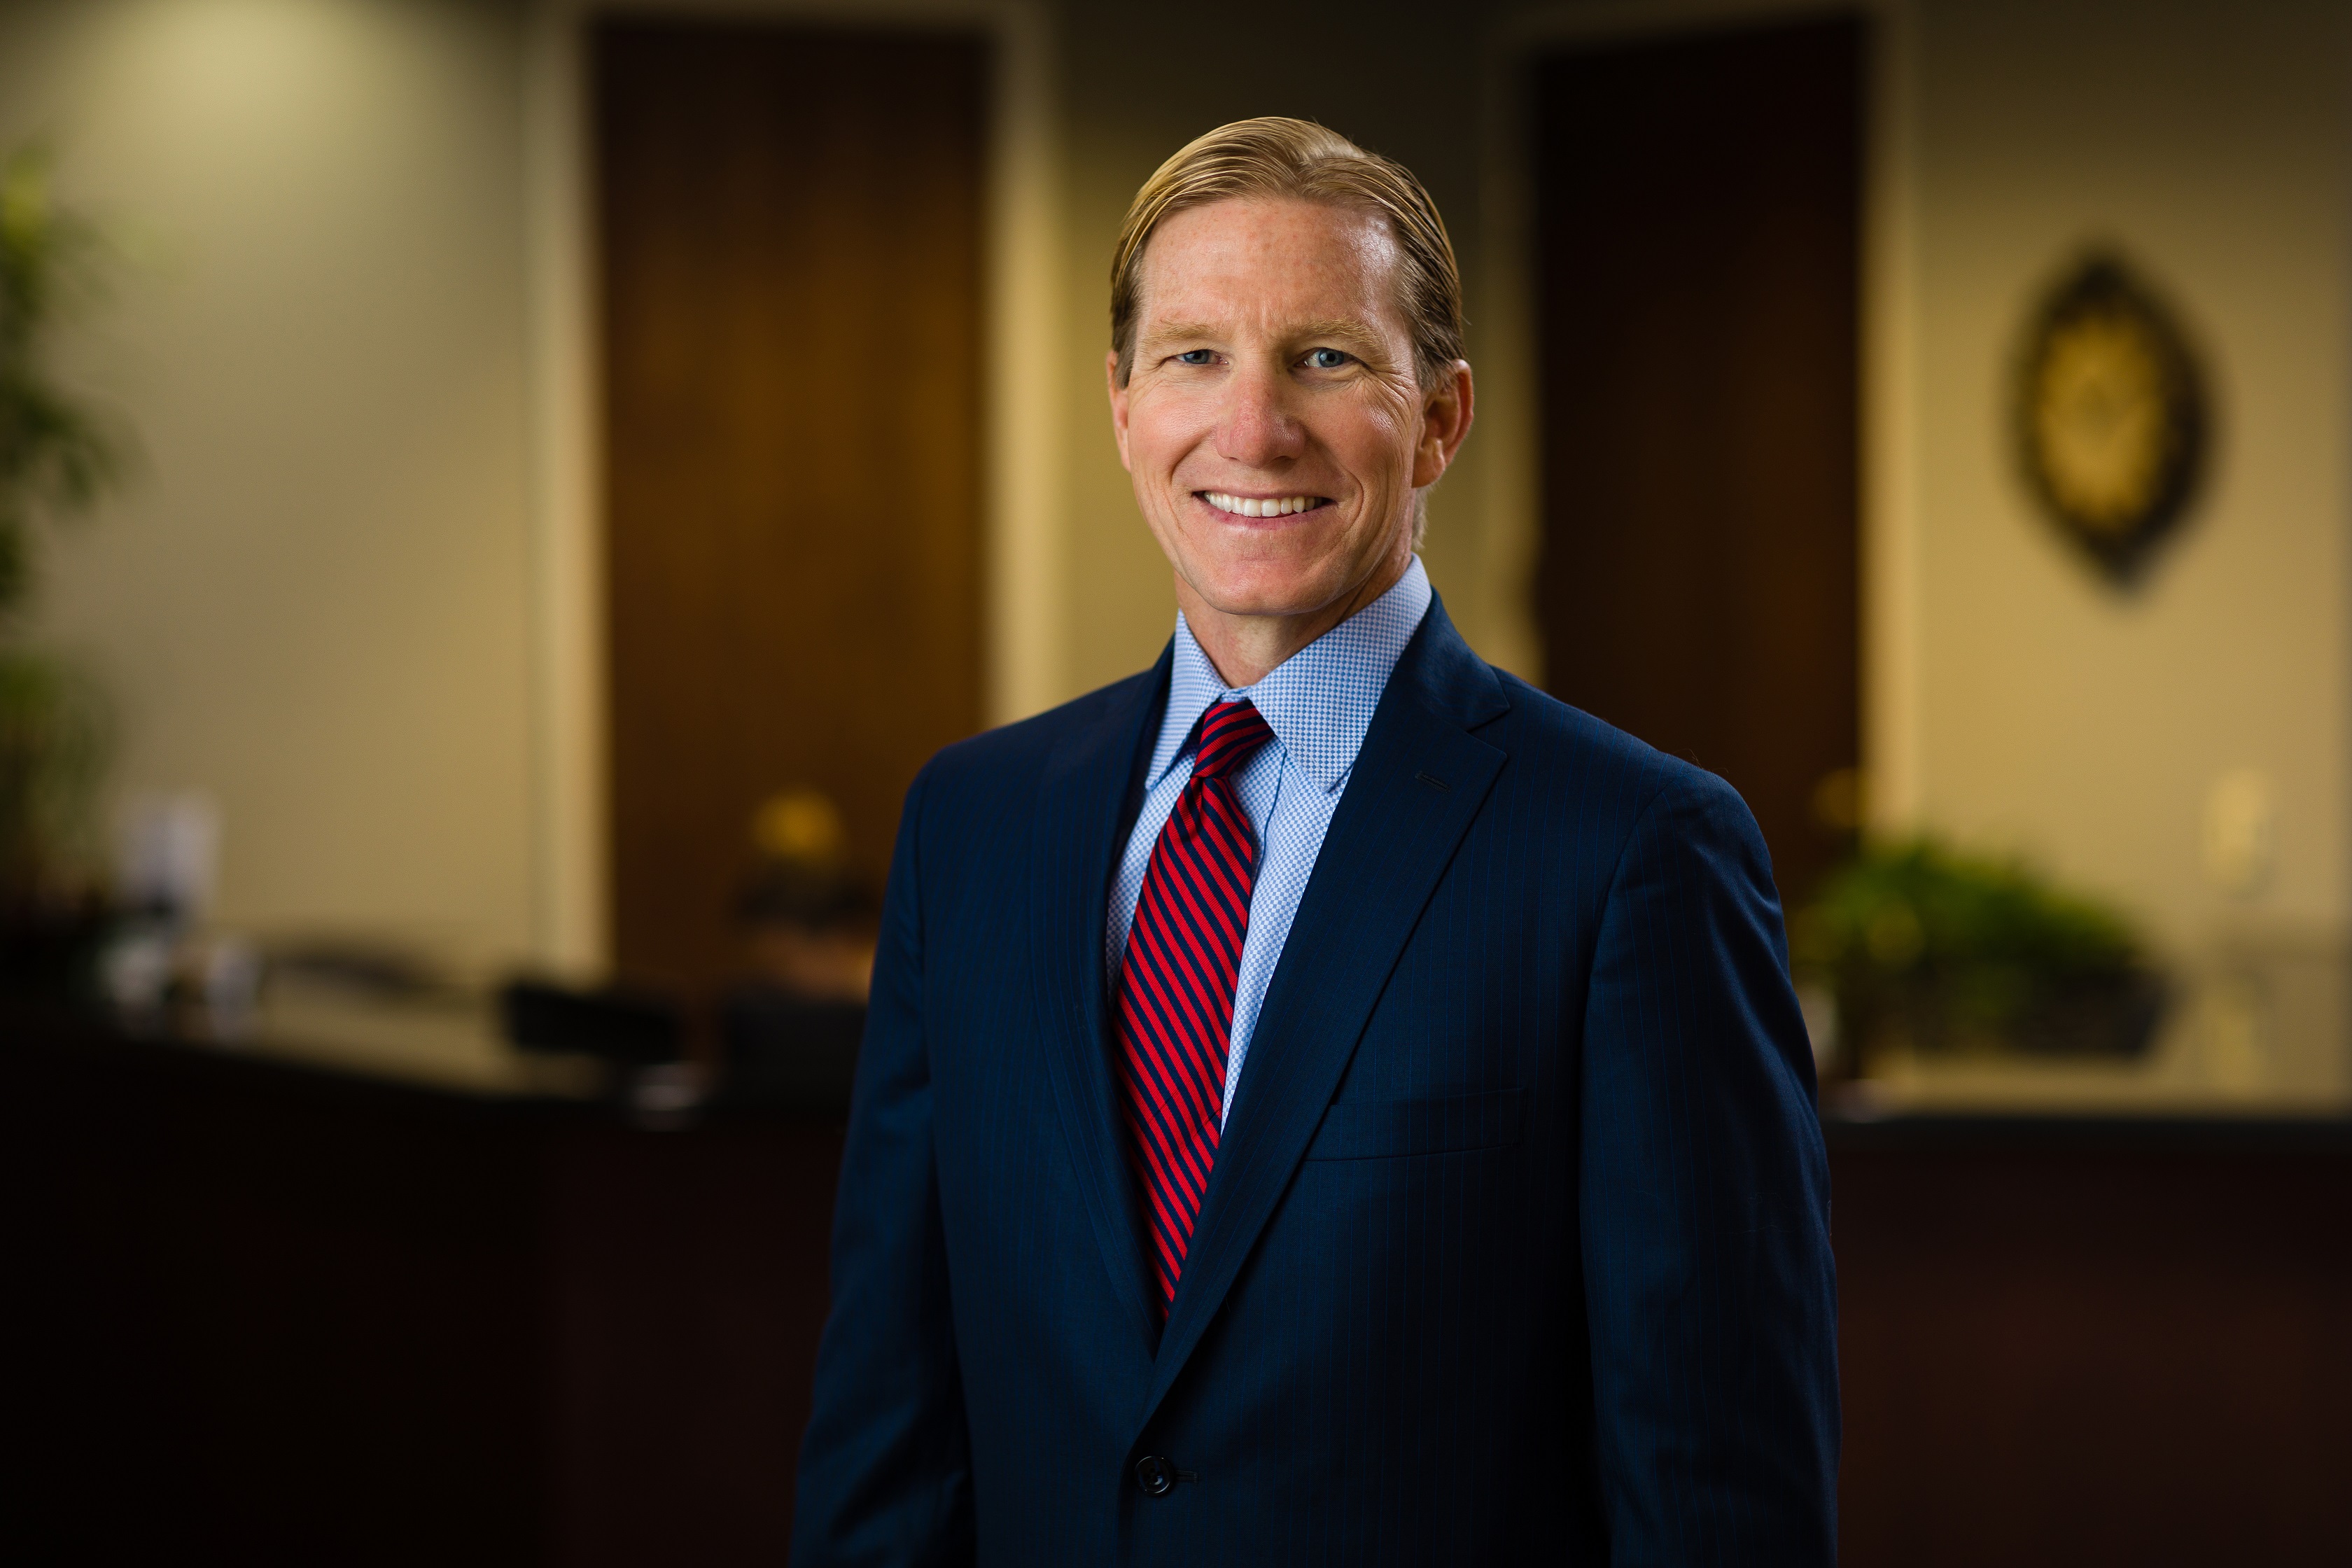 West Palm Beach Personal Injury Attorney Hampton Keen Launches New Firm